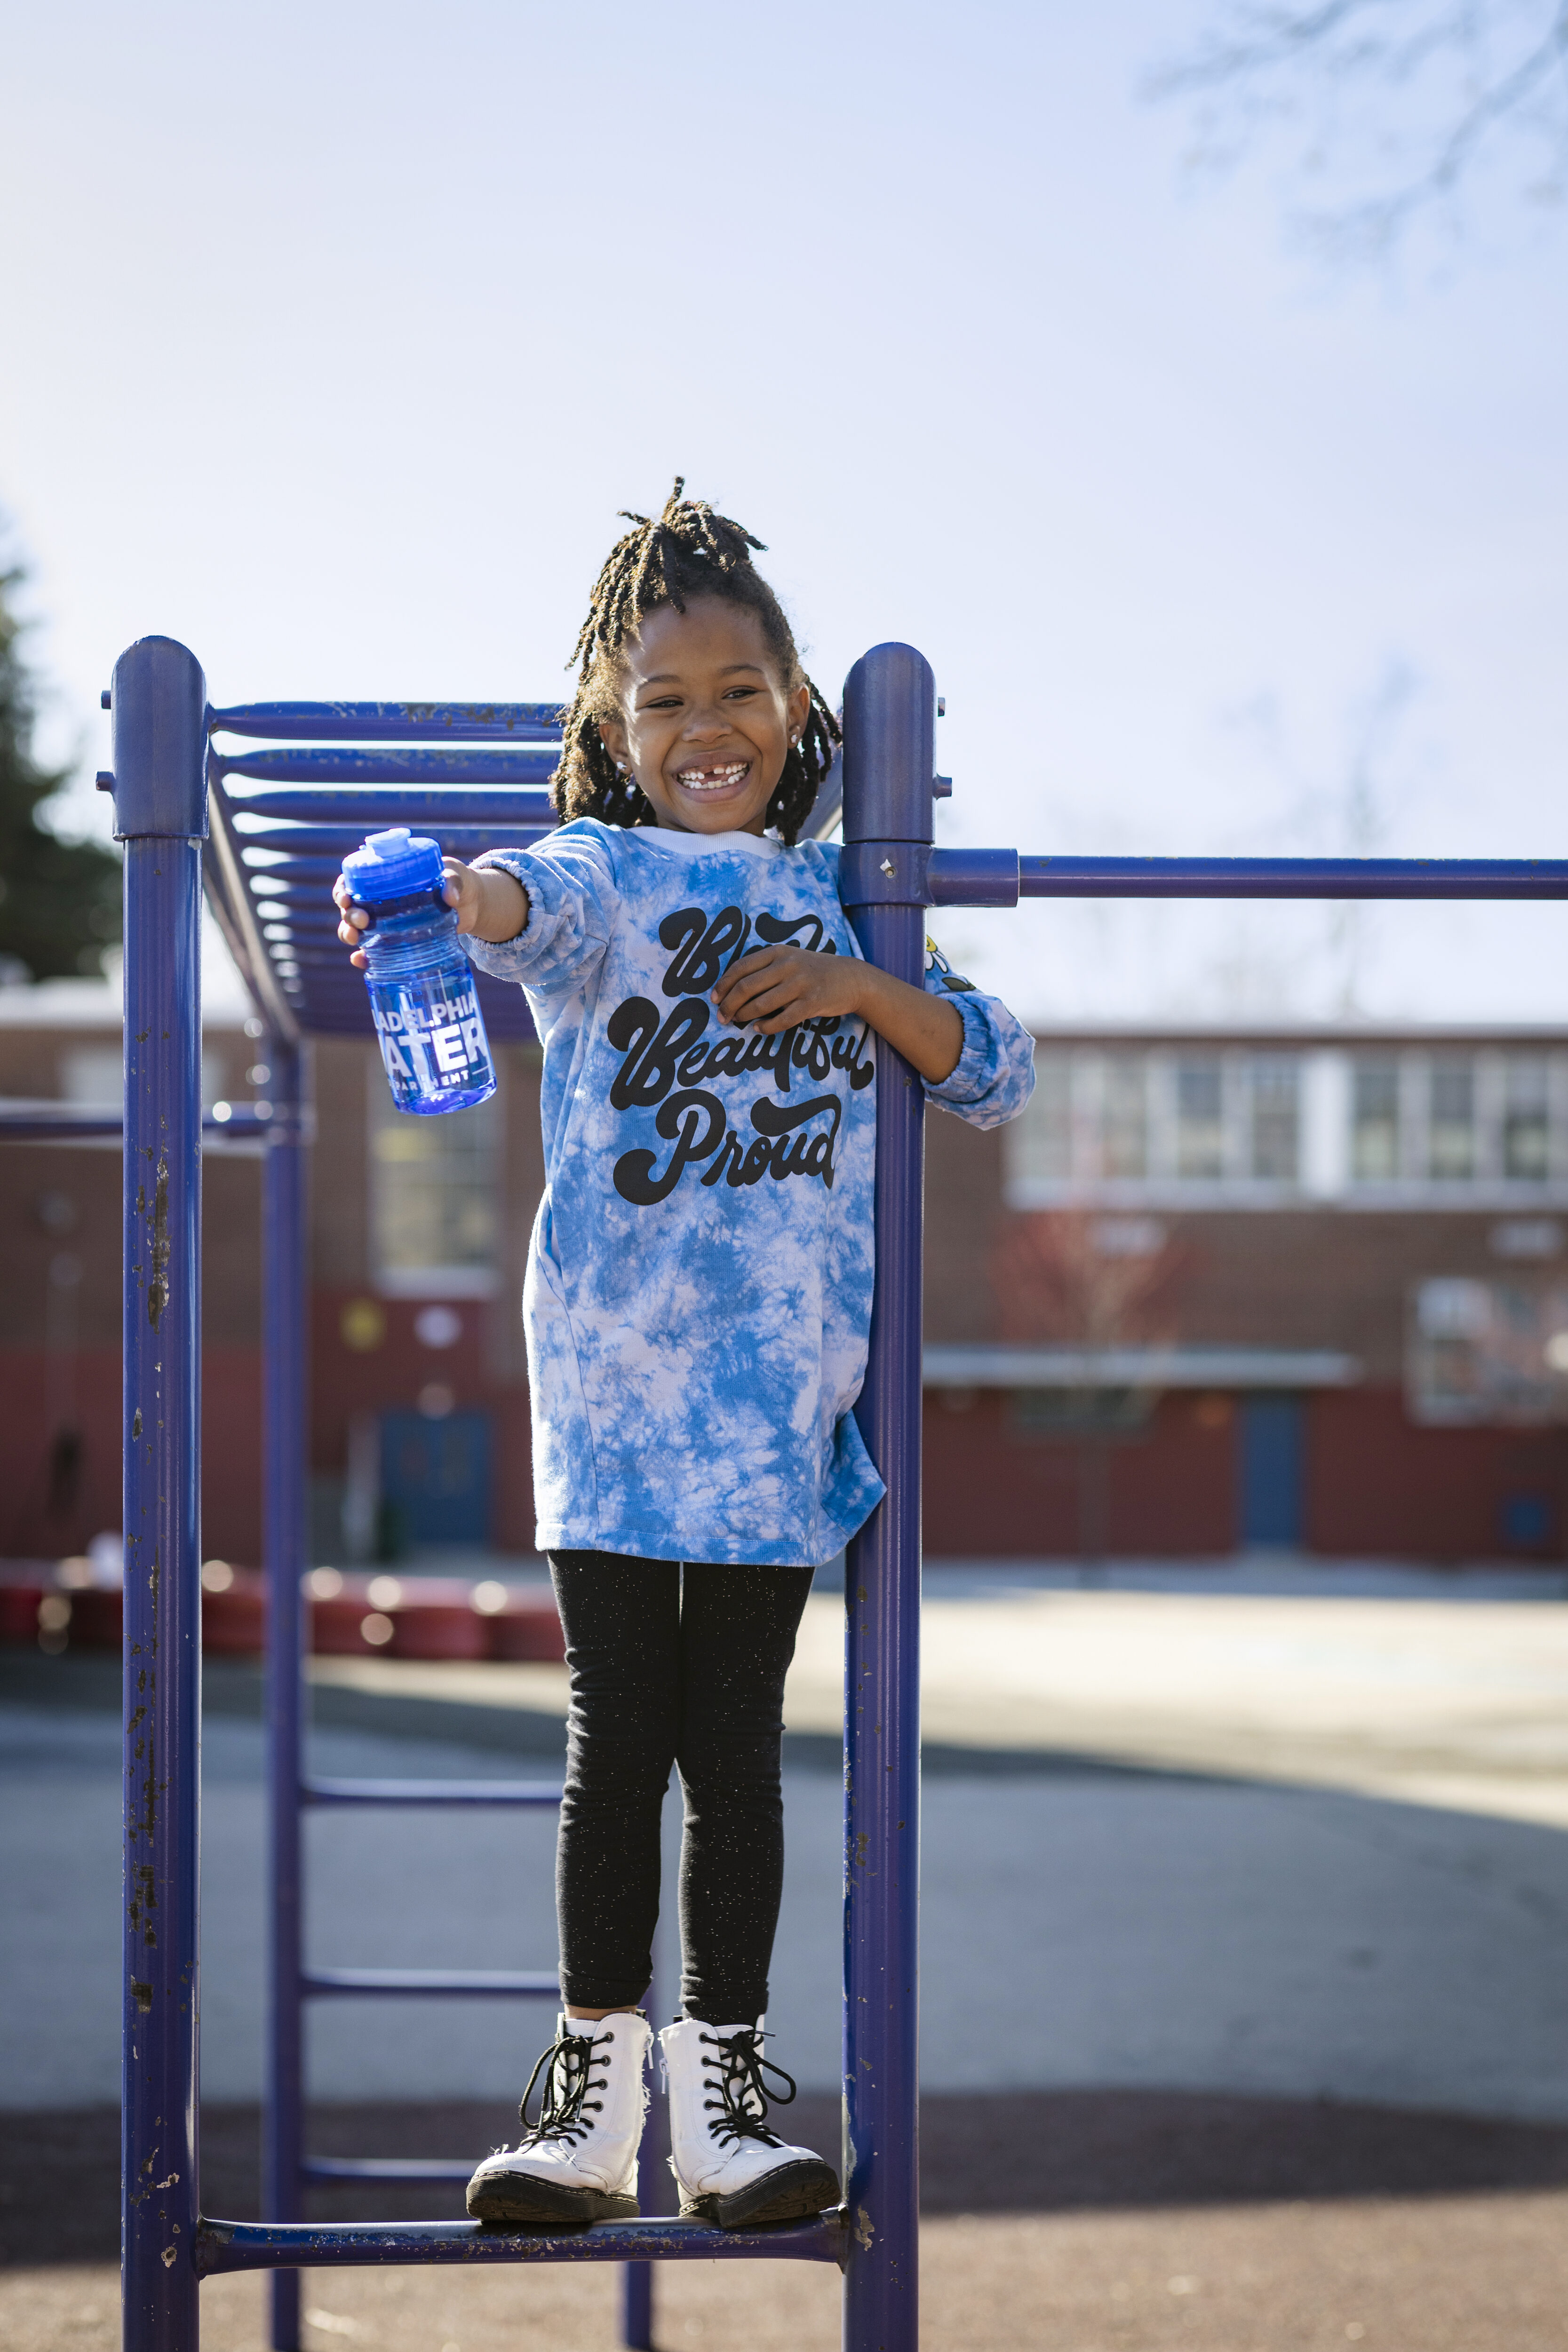 A young girl with a huge smile showing off a missing tooth as she perches on the monkey bars at Ellwood Elementary School, holding up her reusable PWD water bottle. She has brown skin, dark hair in shoulder length braids, half pulled up on top of her head, and is wearing an oversized blue tie-dye tshirt with black leggings and white lace-up boots.